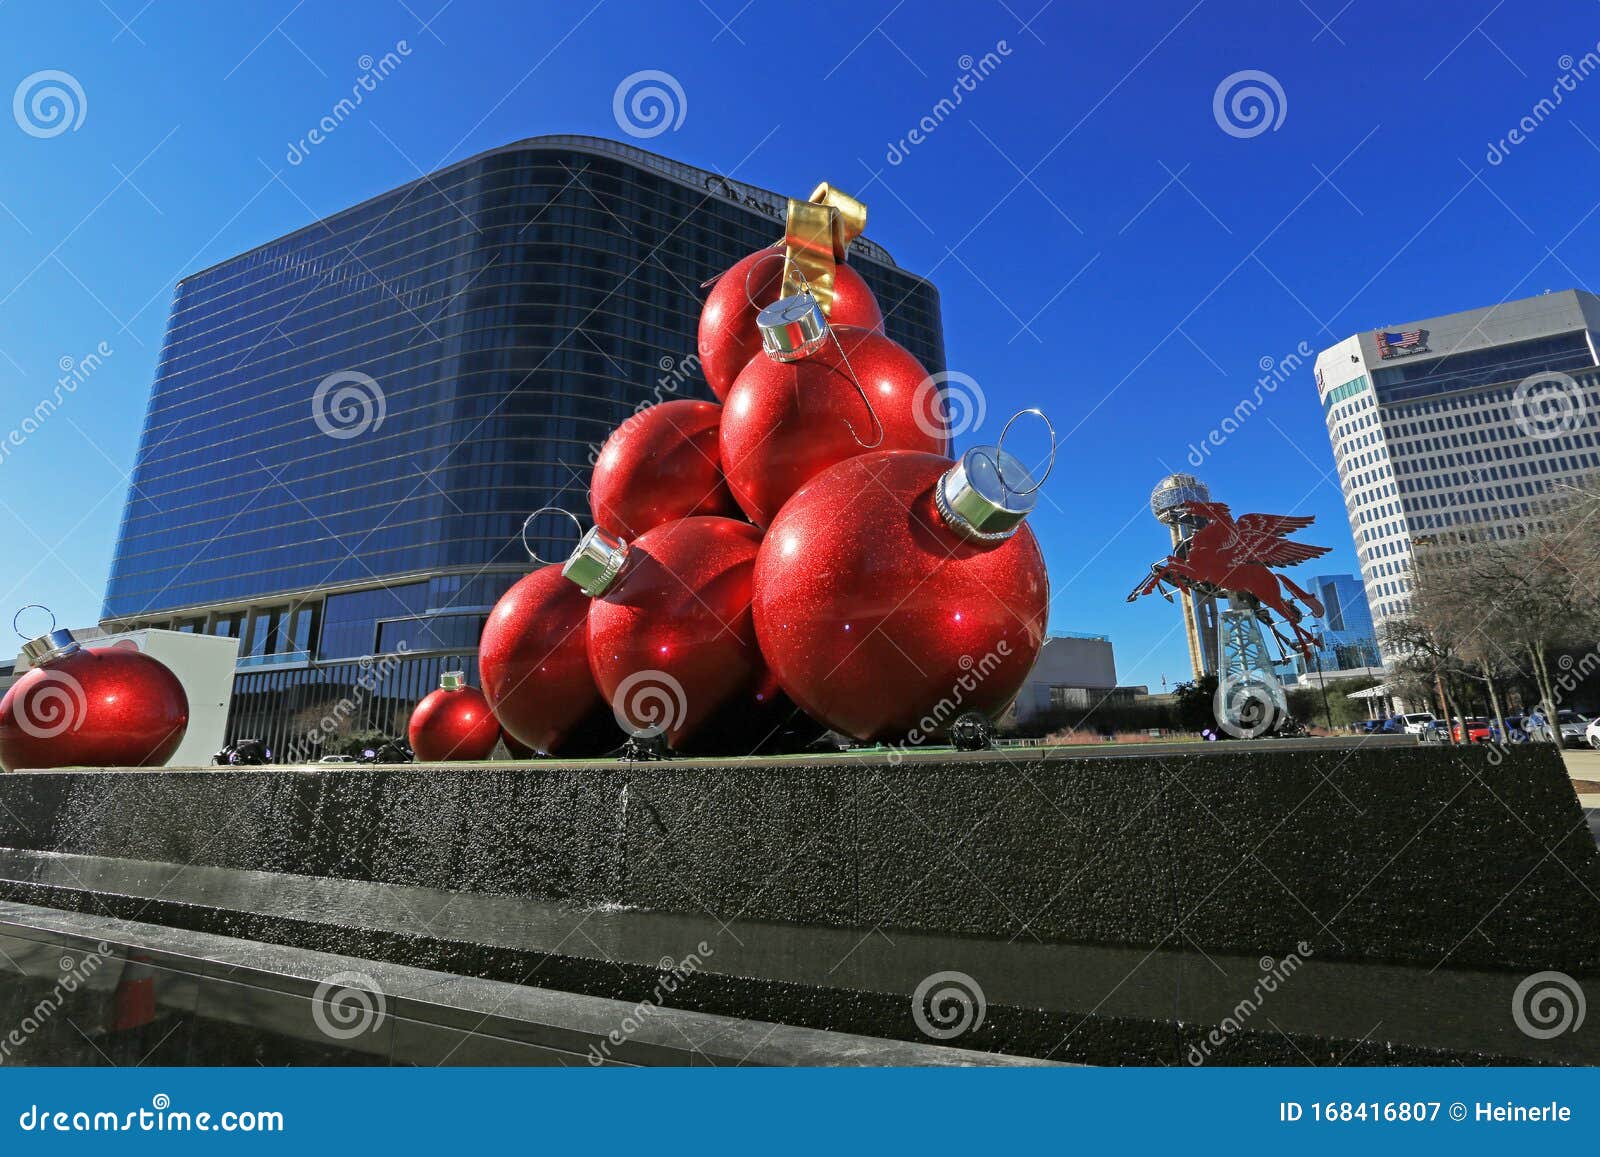 Christmas Decorations in Downtown Dallas Dec 2019 Editorial Photography